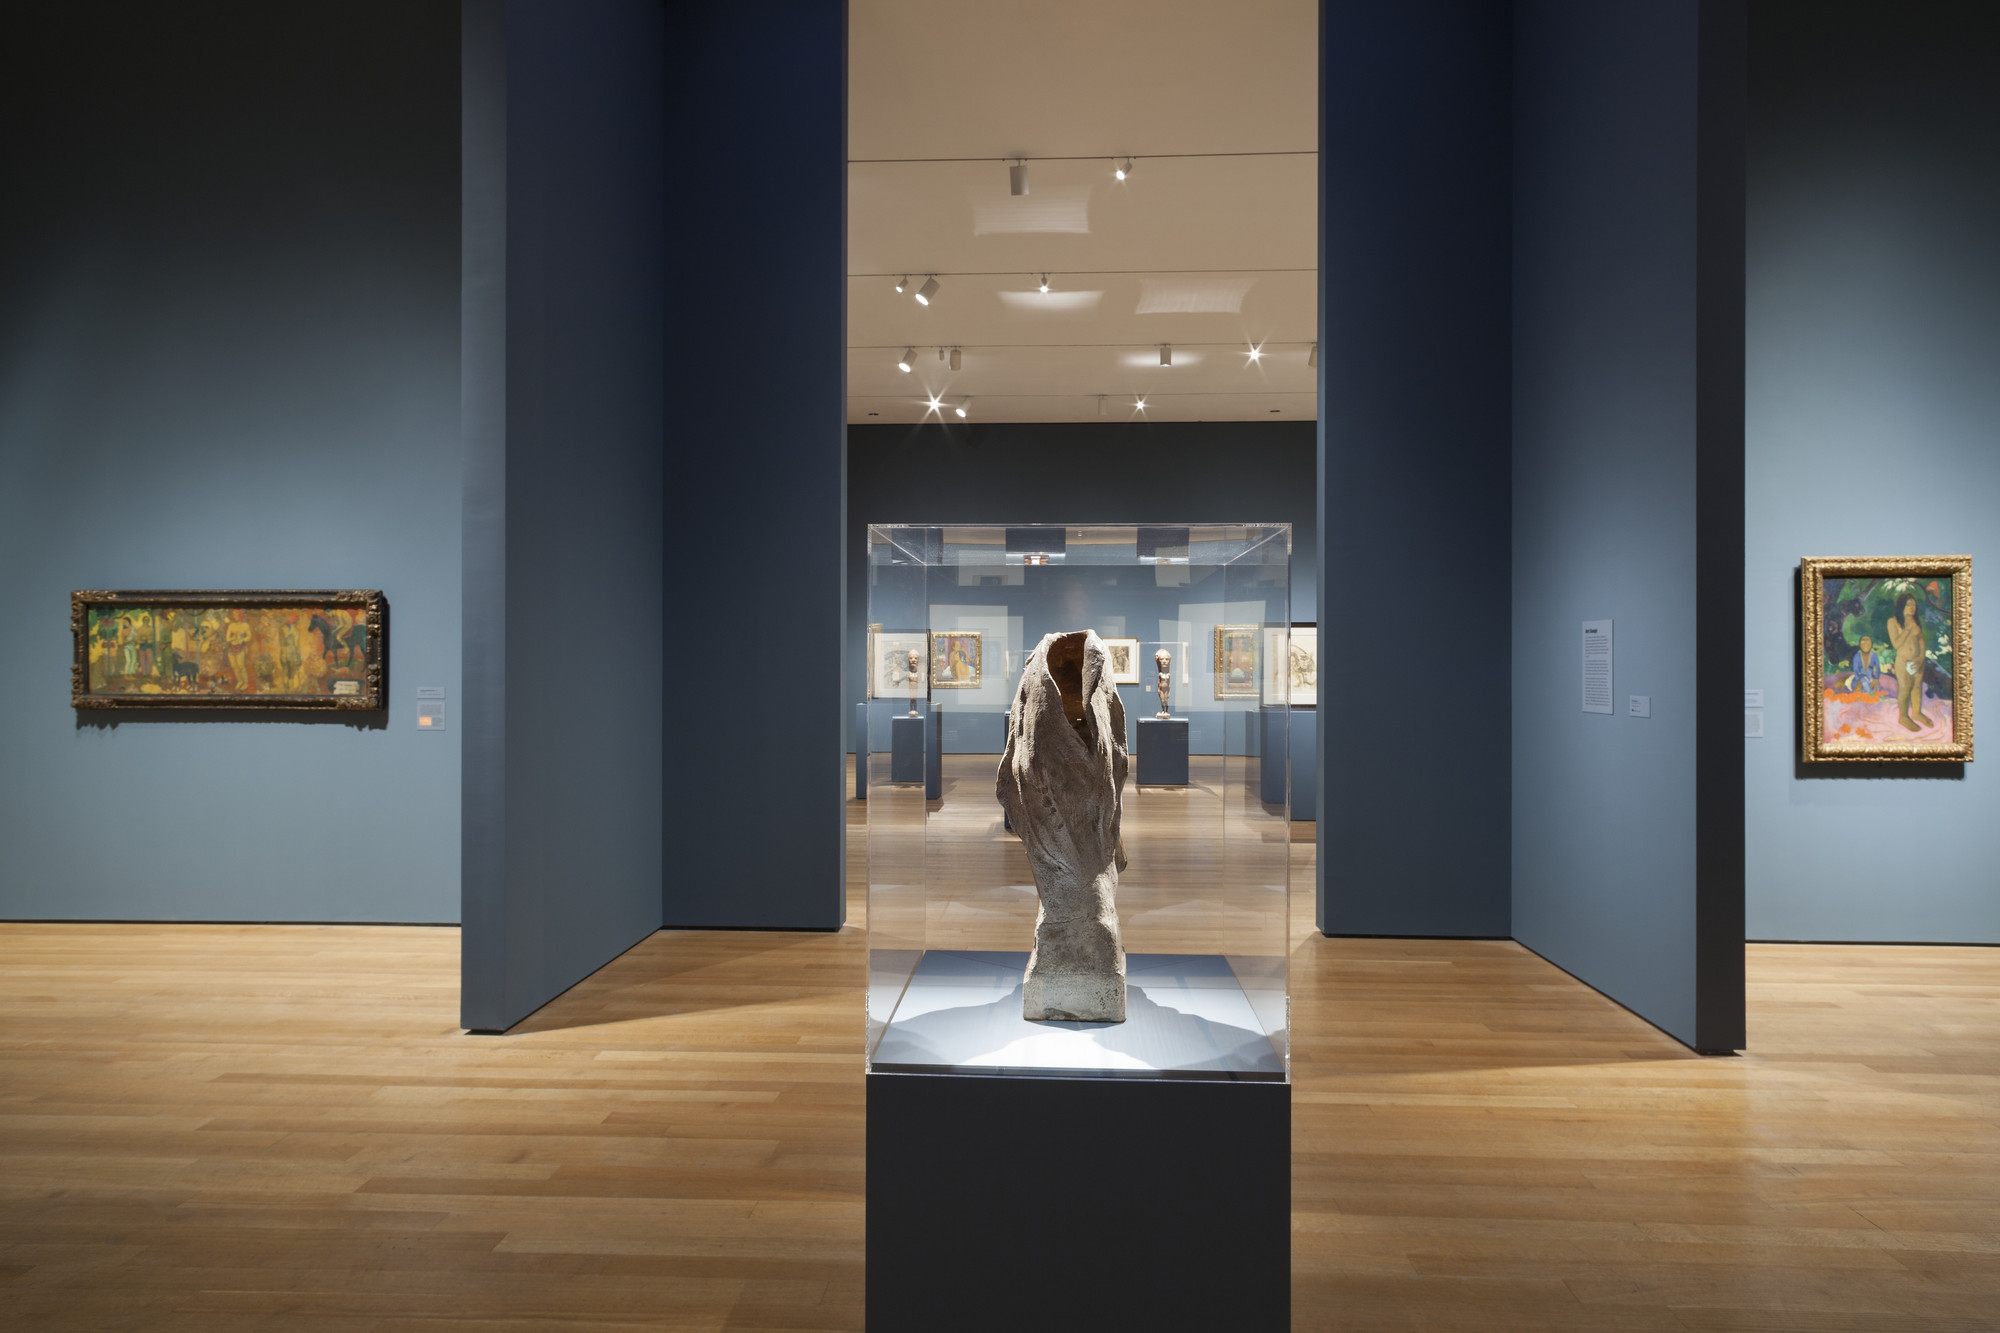 Installation view of the exhibition "Gauguin Metamorphoses" MoMA